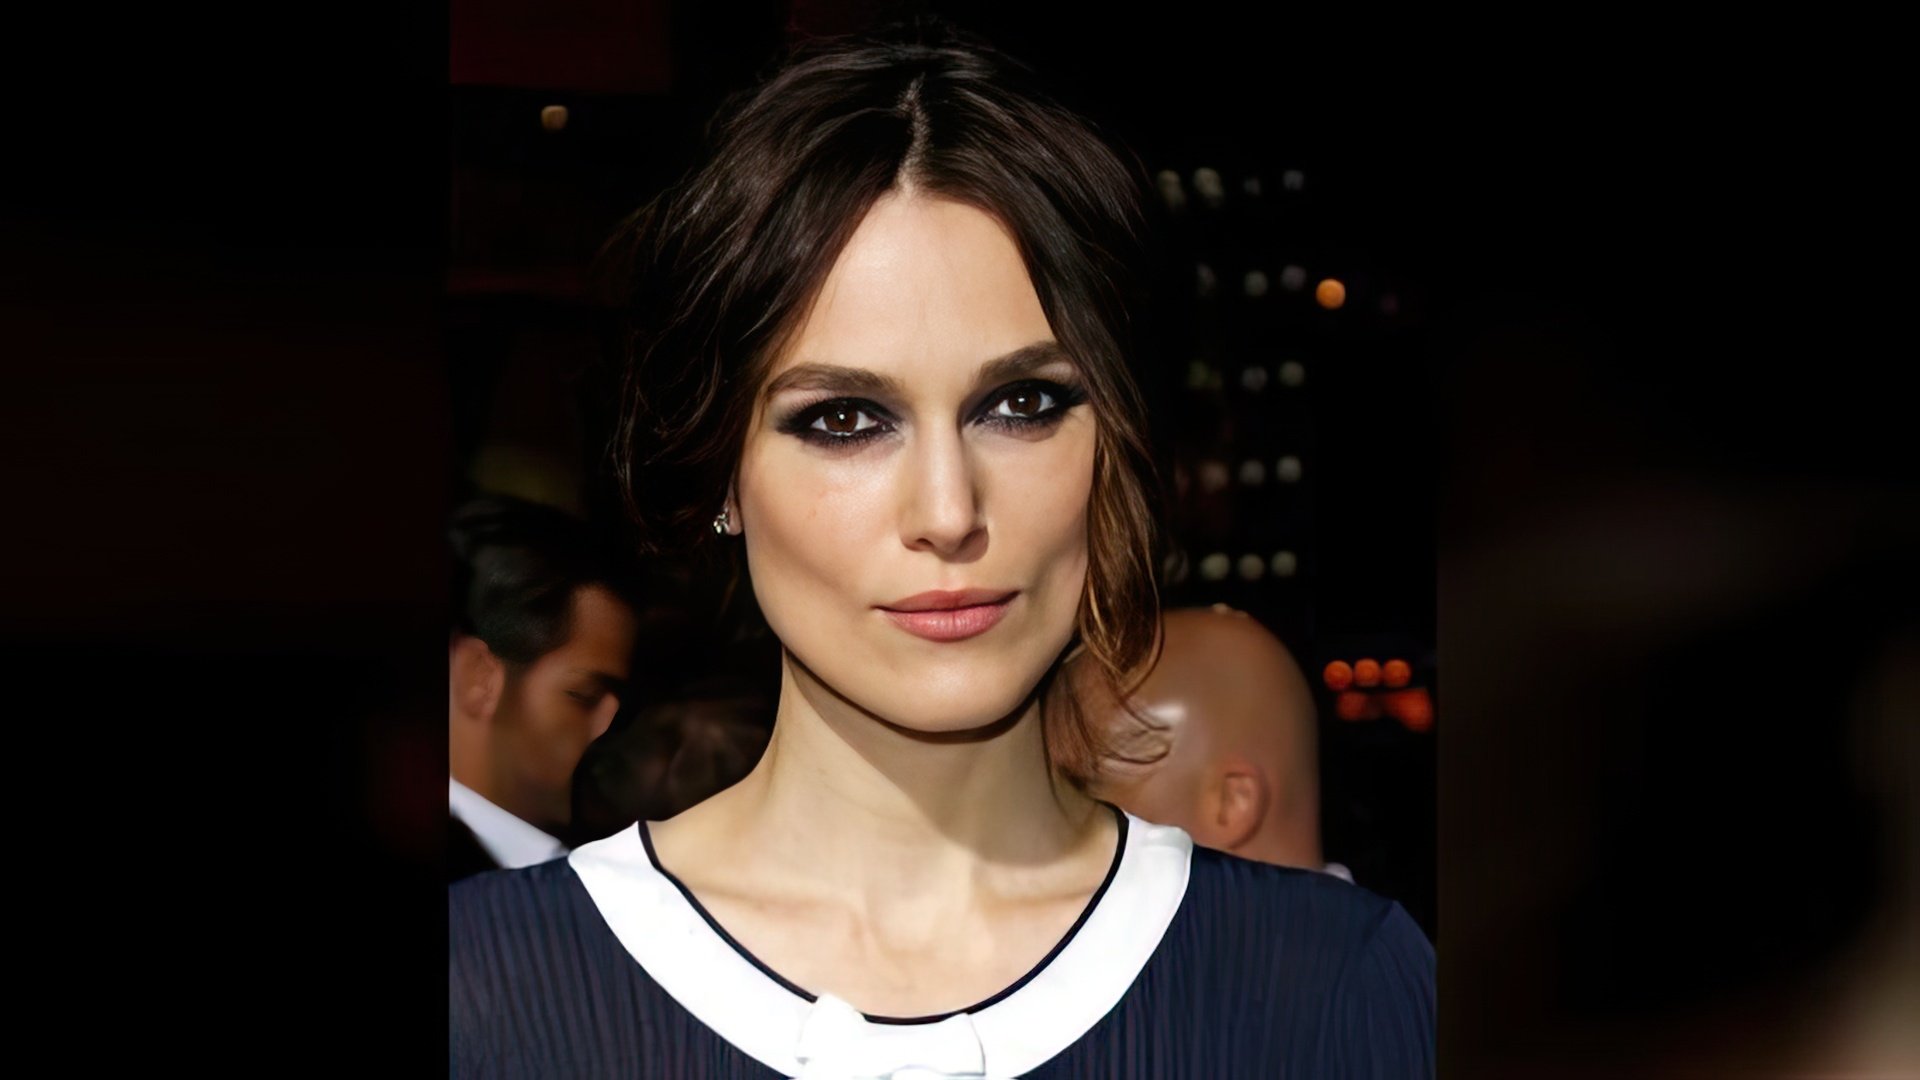 Keira Knightley at the premiere of “Jack Ryan: Shadow Recruit”